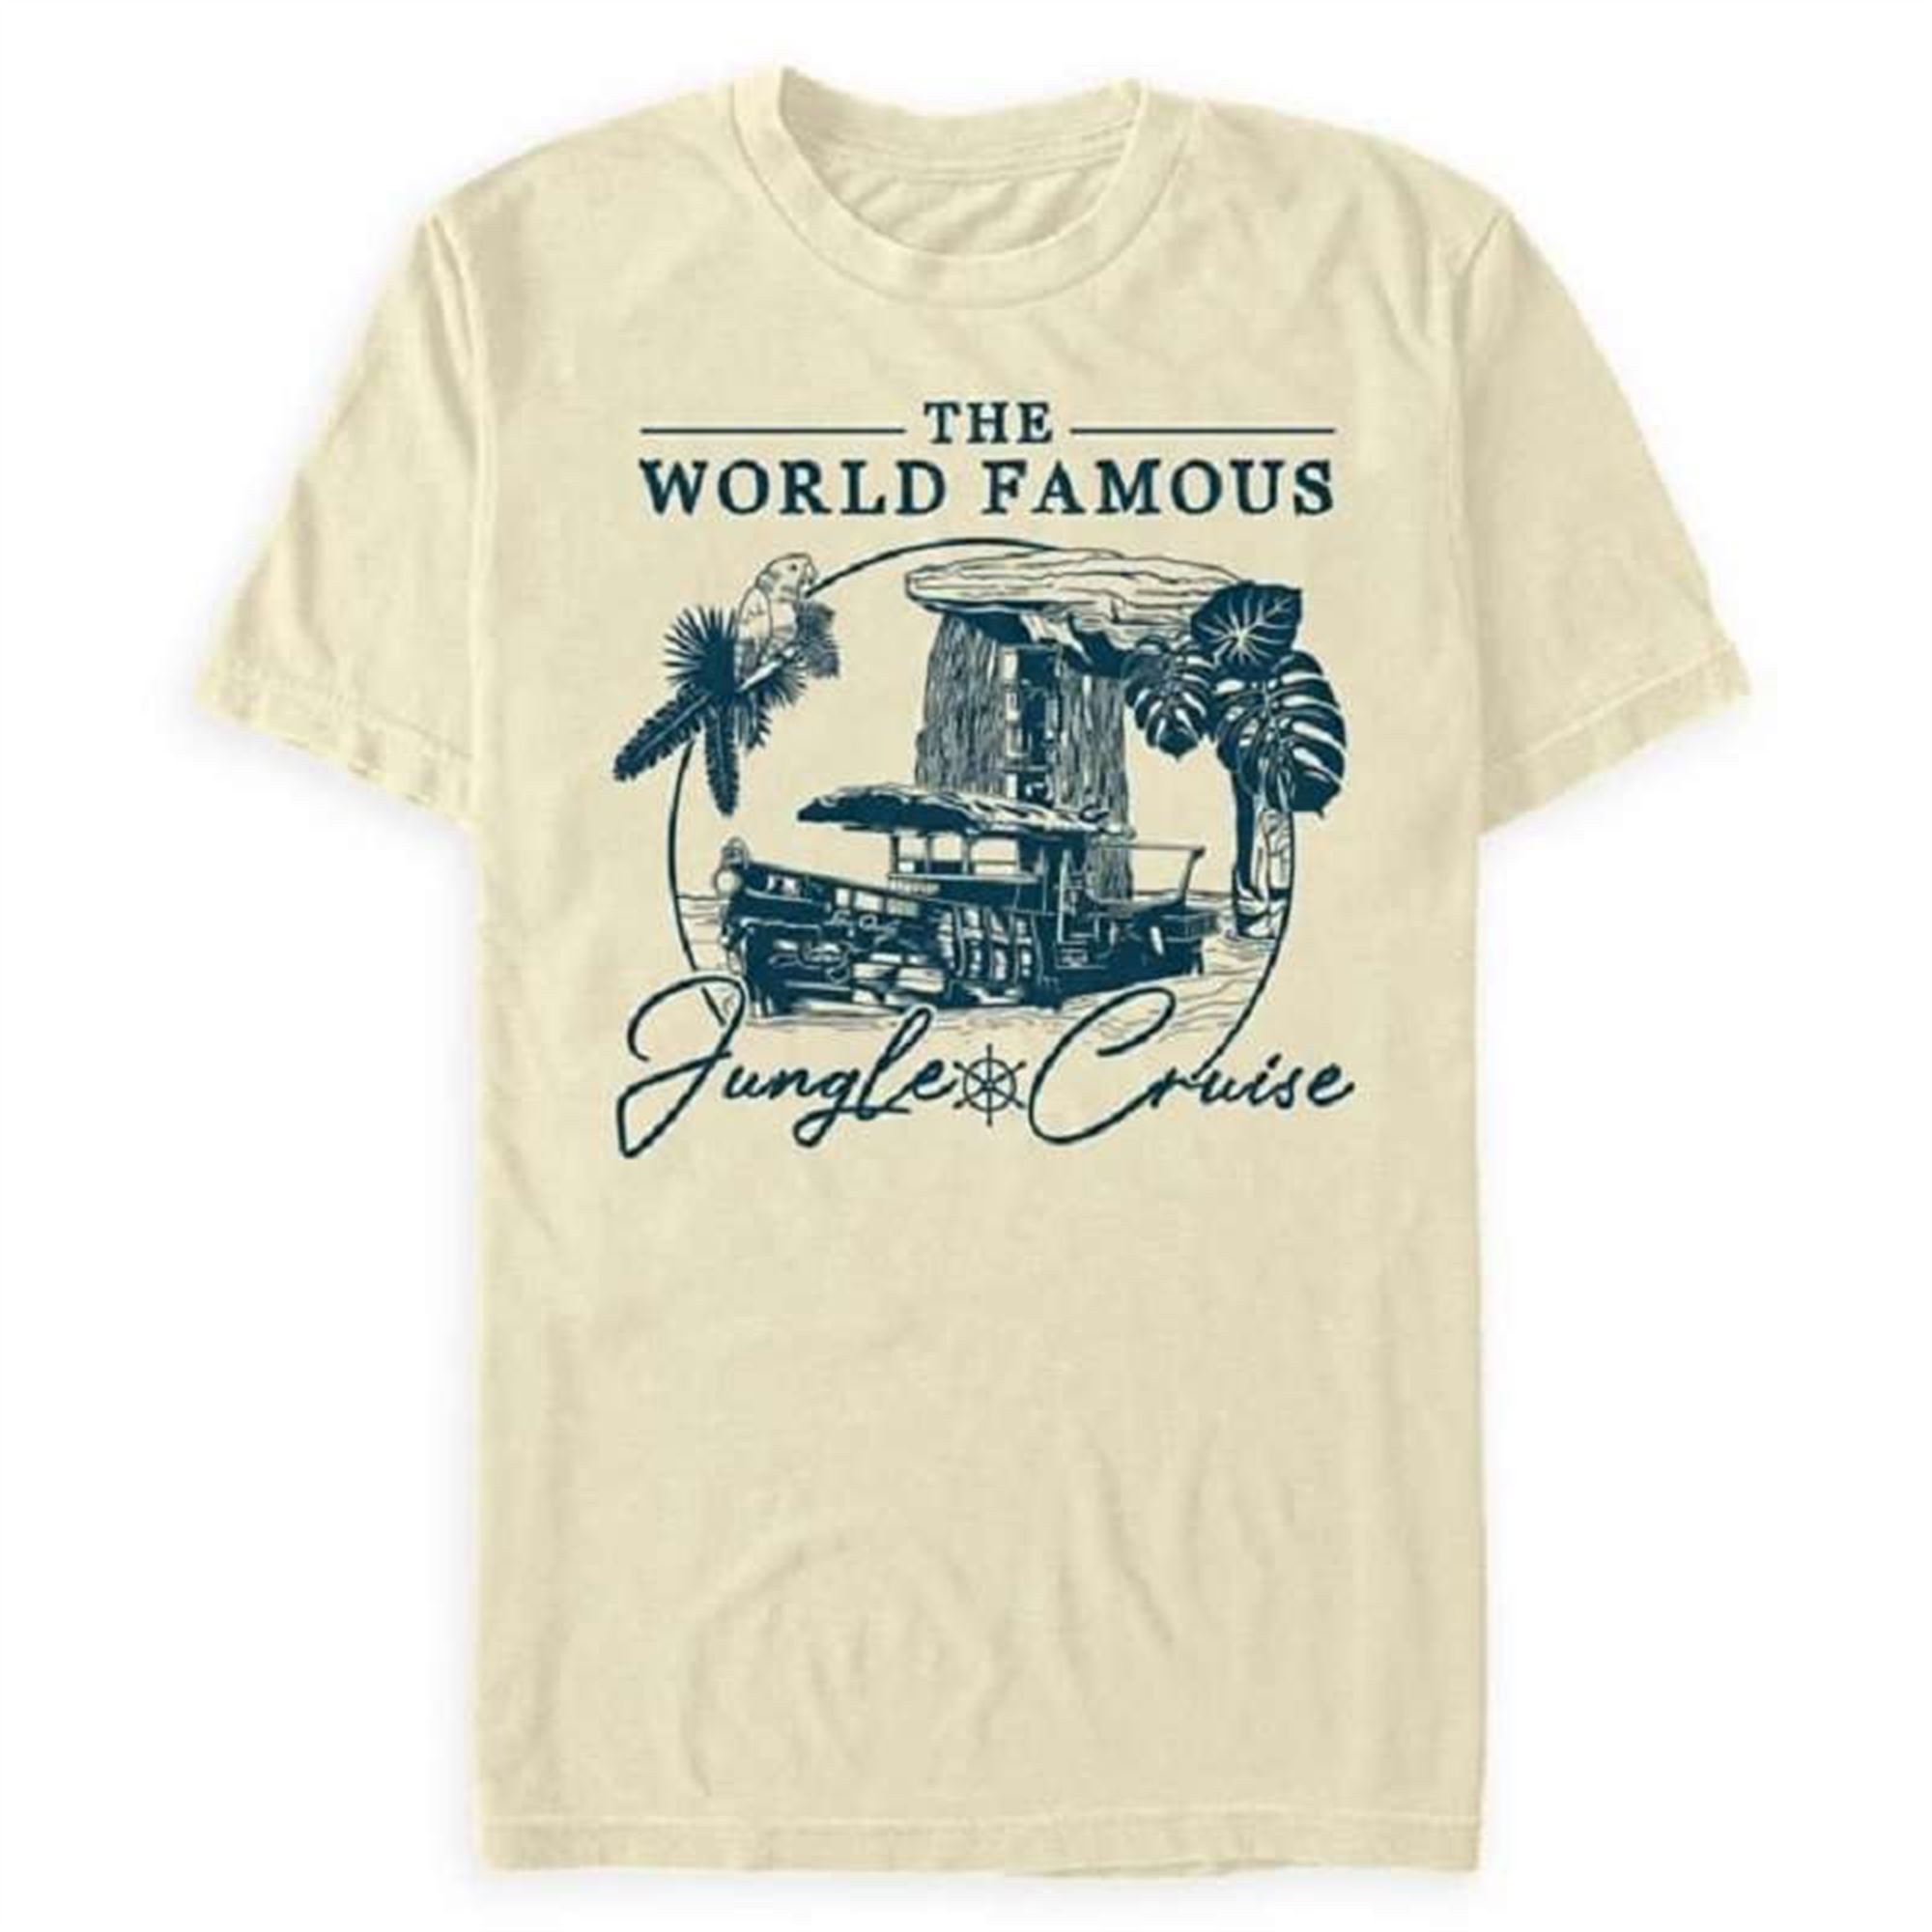 The World Famous Jungle Cruise Illustration For Adults T-shirt Size Up To 5xl